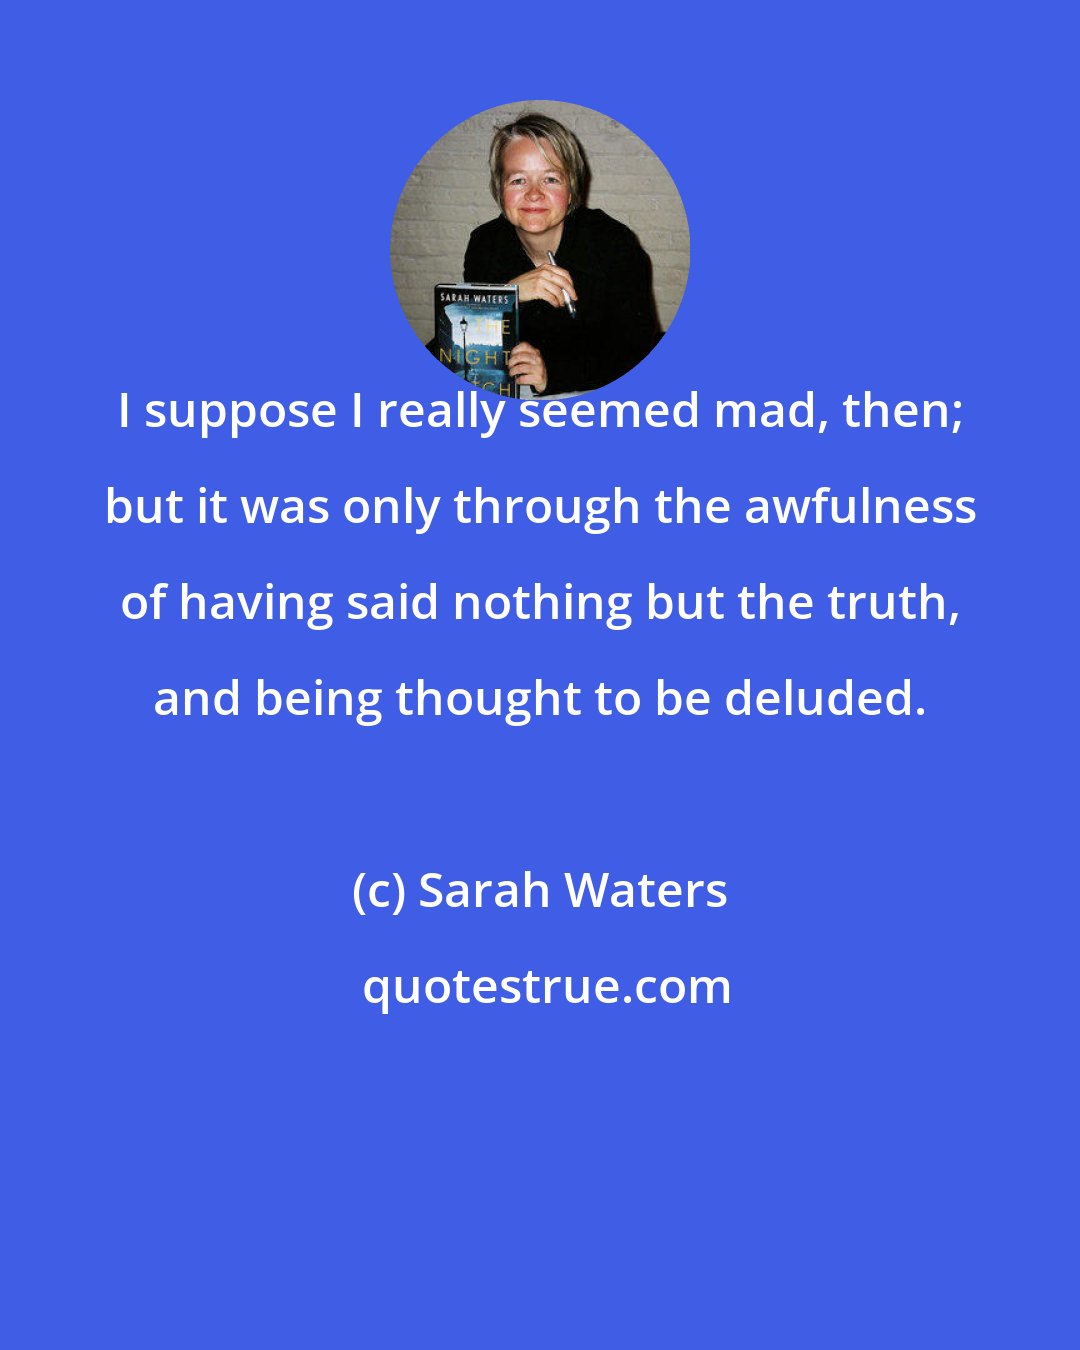 Sarah Waters: I suppose I really seemed mad, then; but it was only through the awfulness of having said nothing but the truth, and being thought to be deluded.